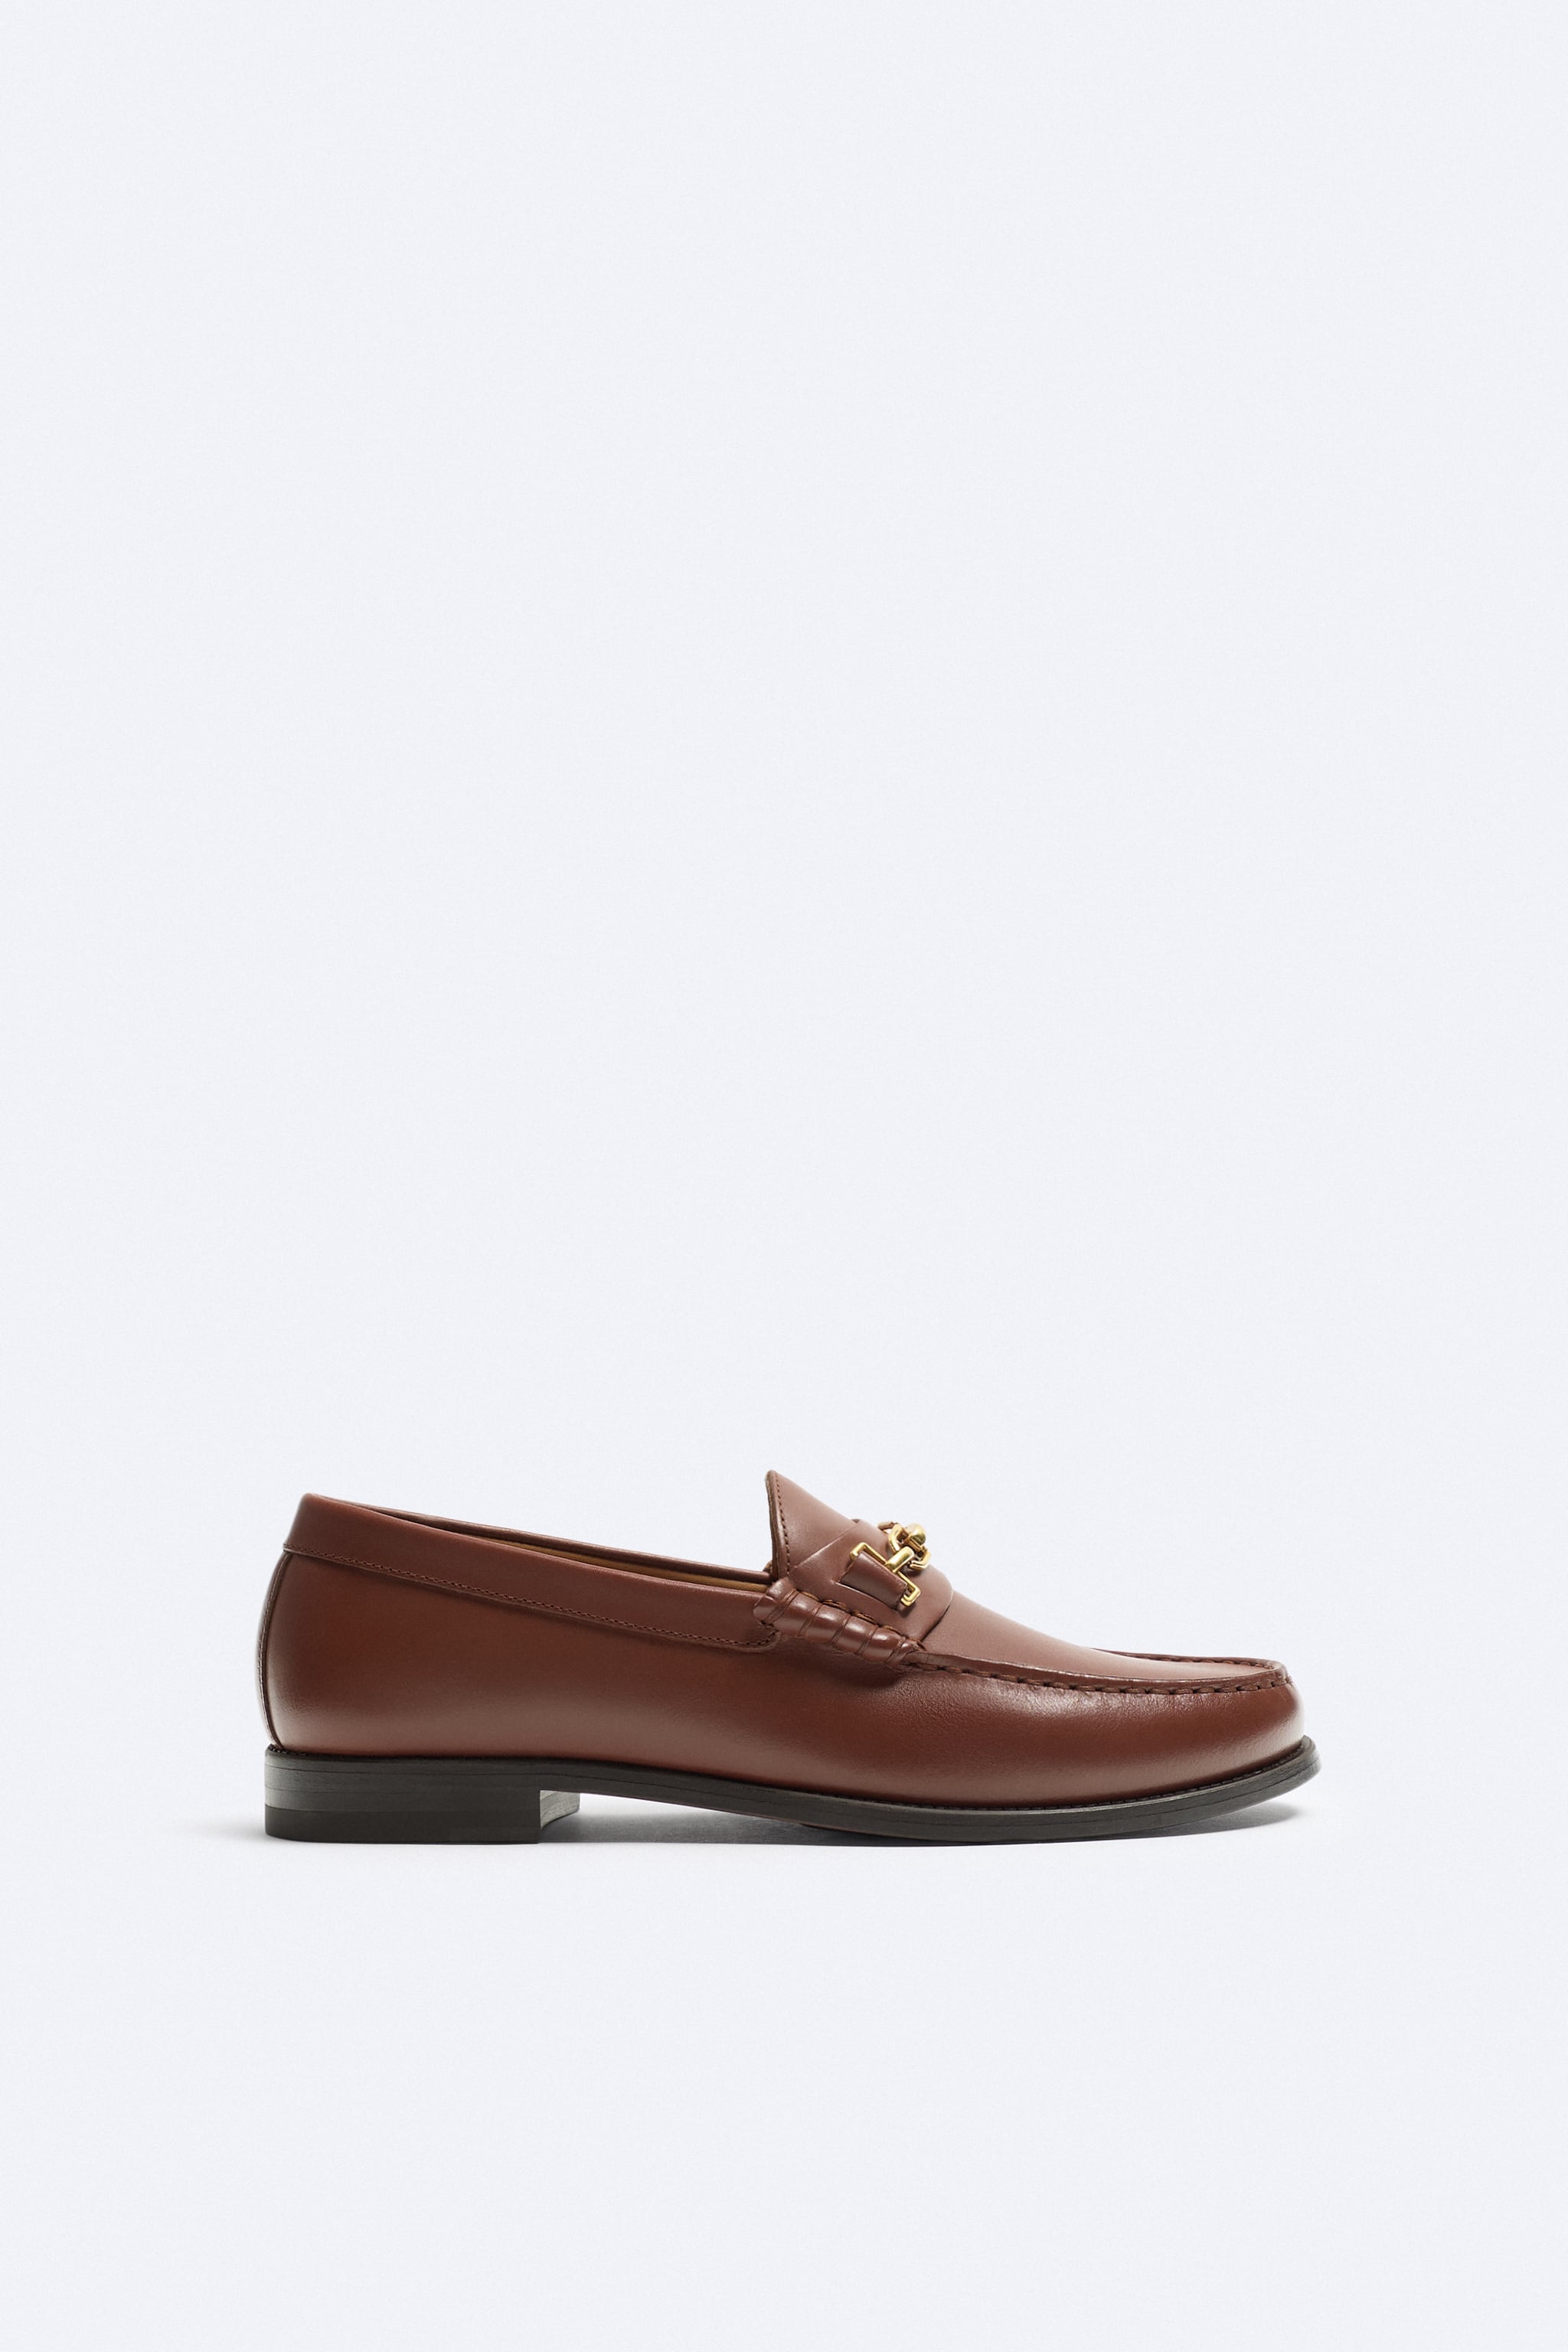 METAL BIT LEATHER LOAFERS